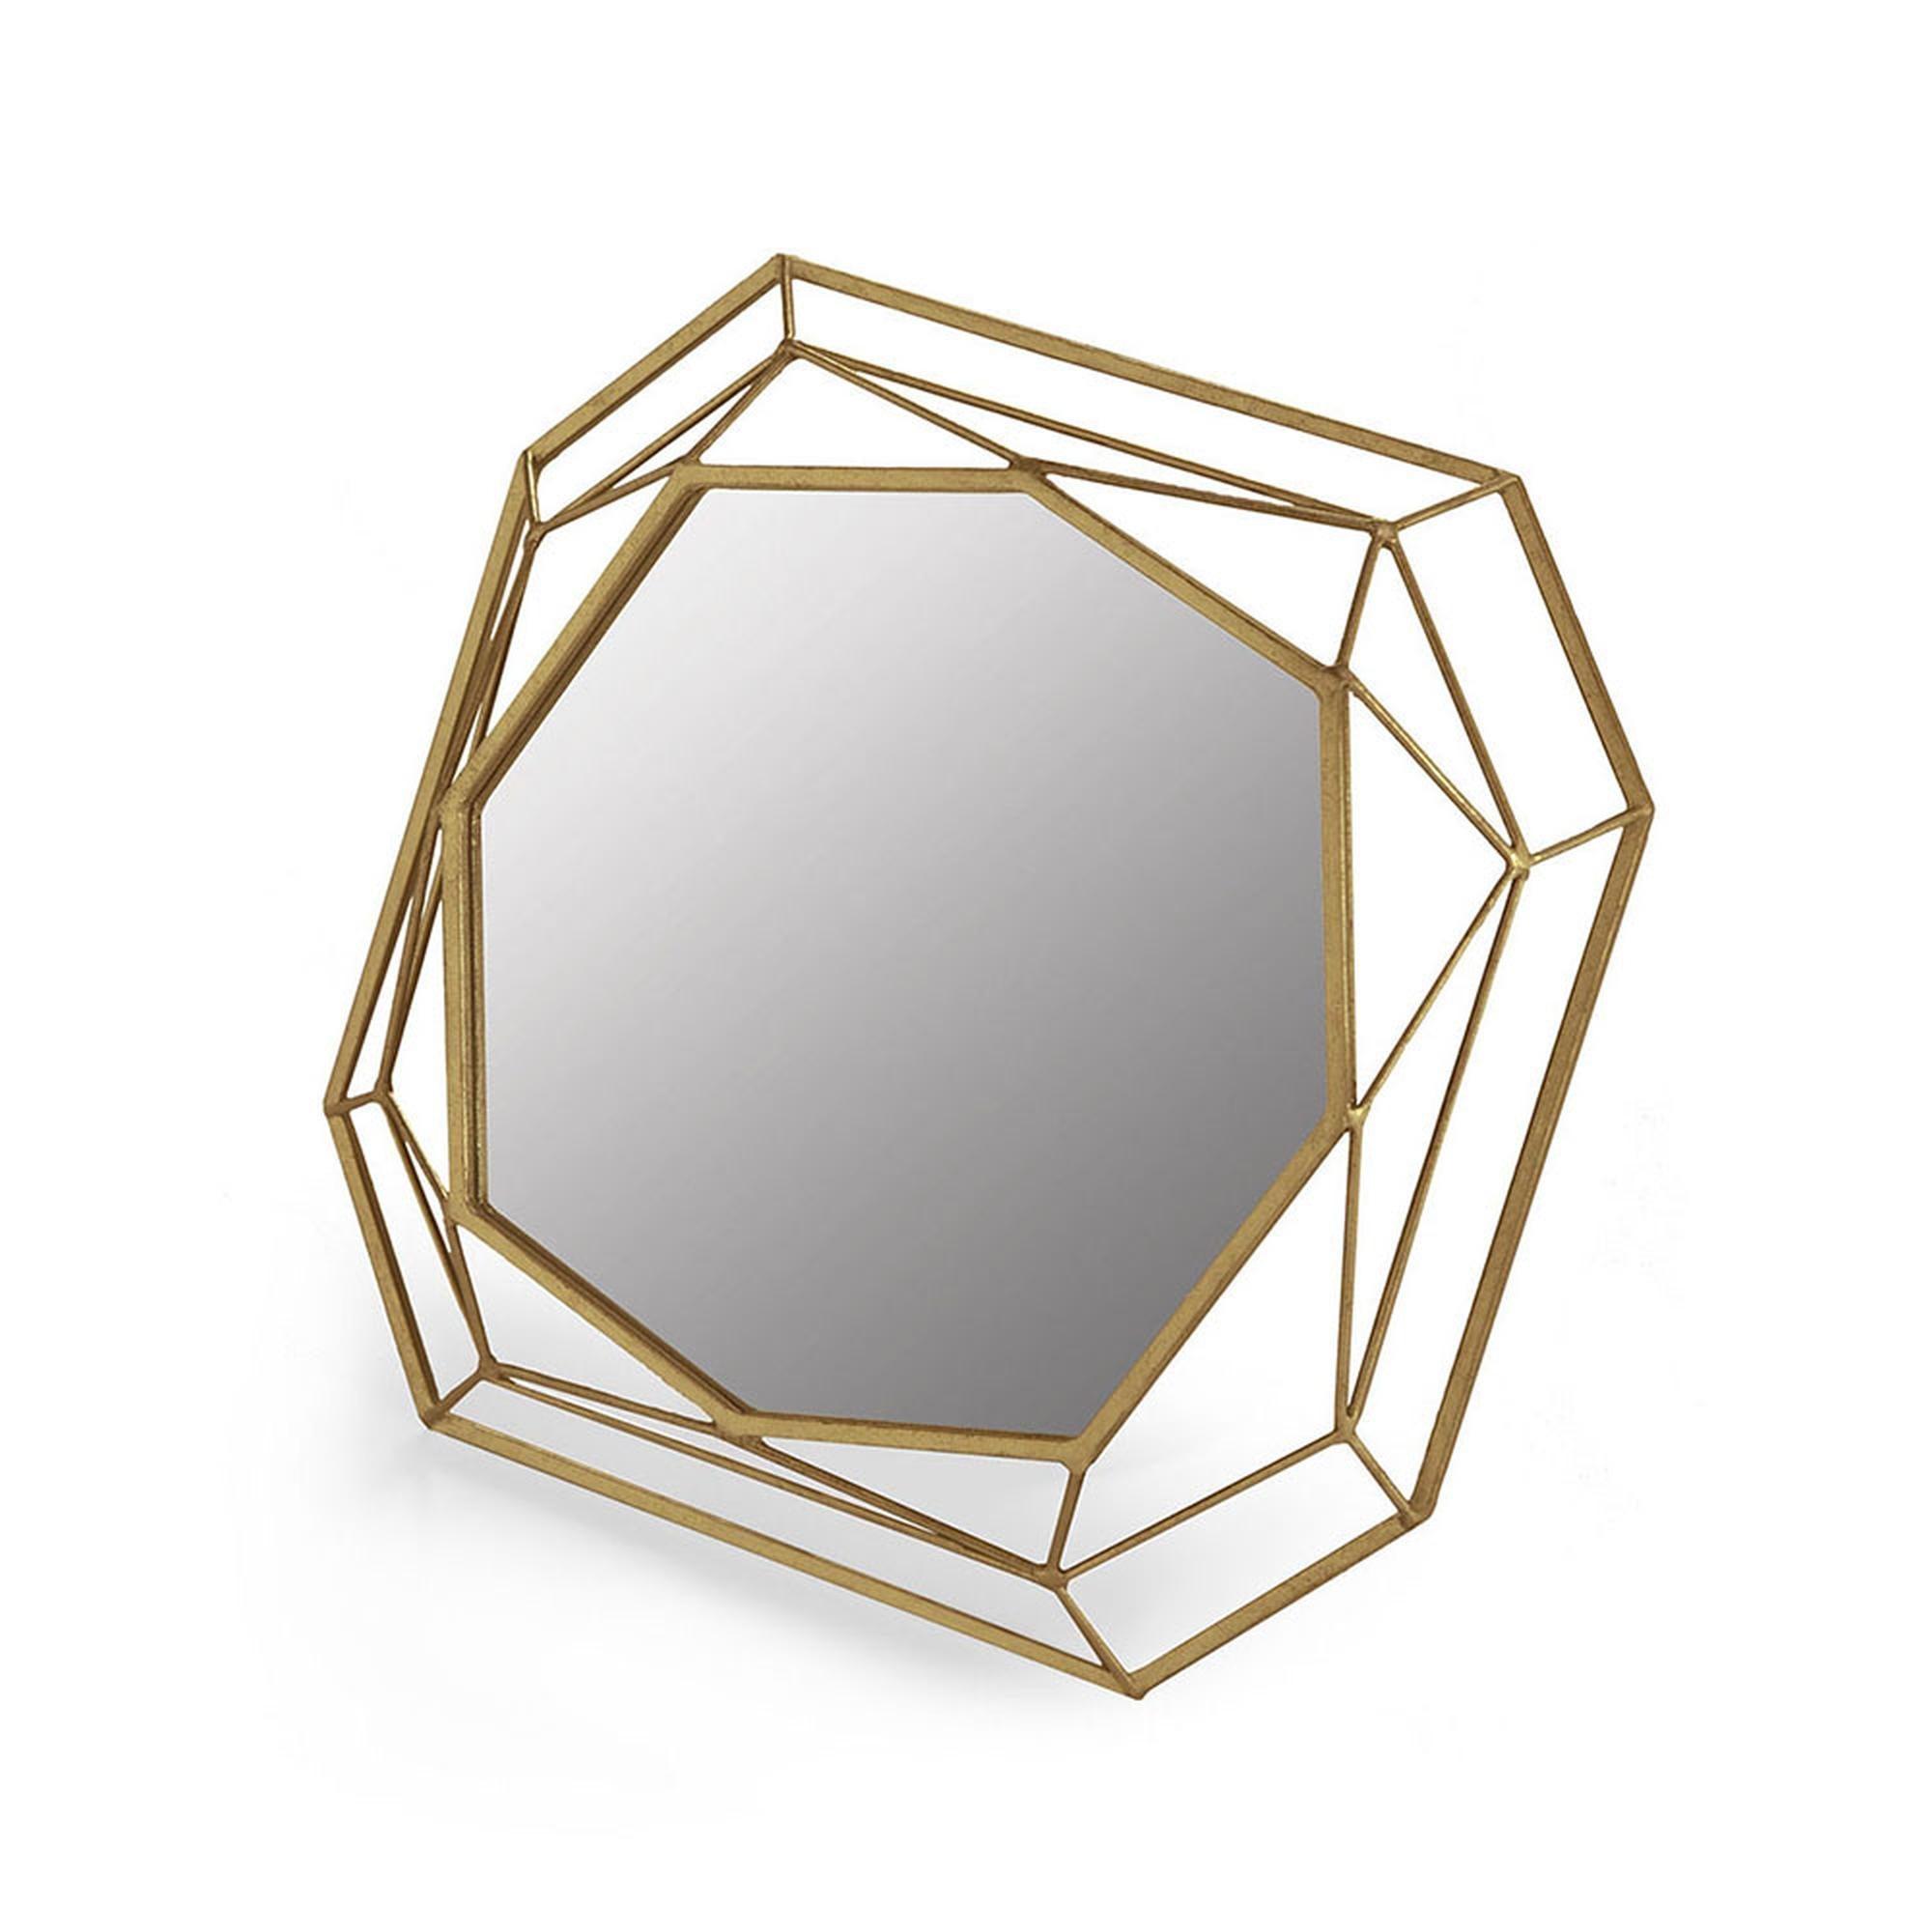 This geometric set of hand-gilded metal mirrors is a modern minimalist take on the traditional mirror. The stunning Mulholland mirror set works well in a variety of stylistic settings and looks best when blended together amongst all three